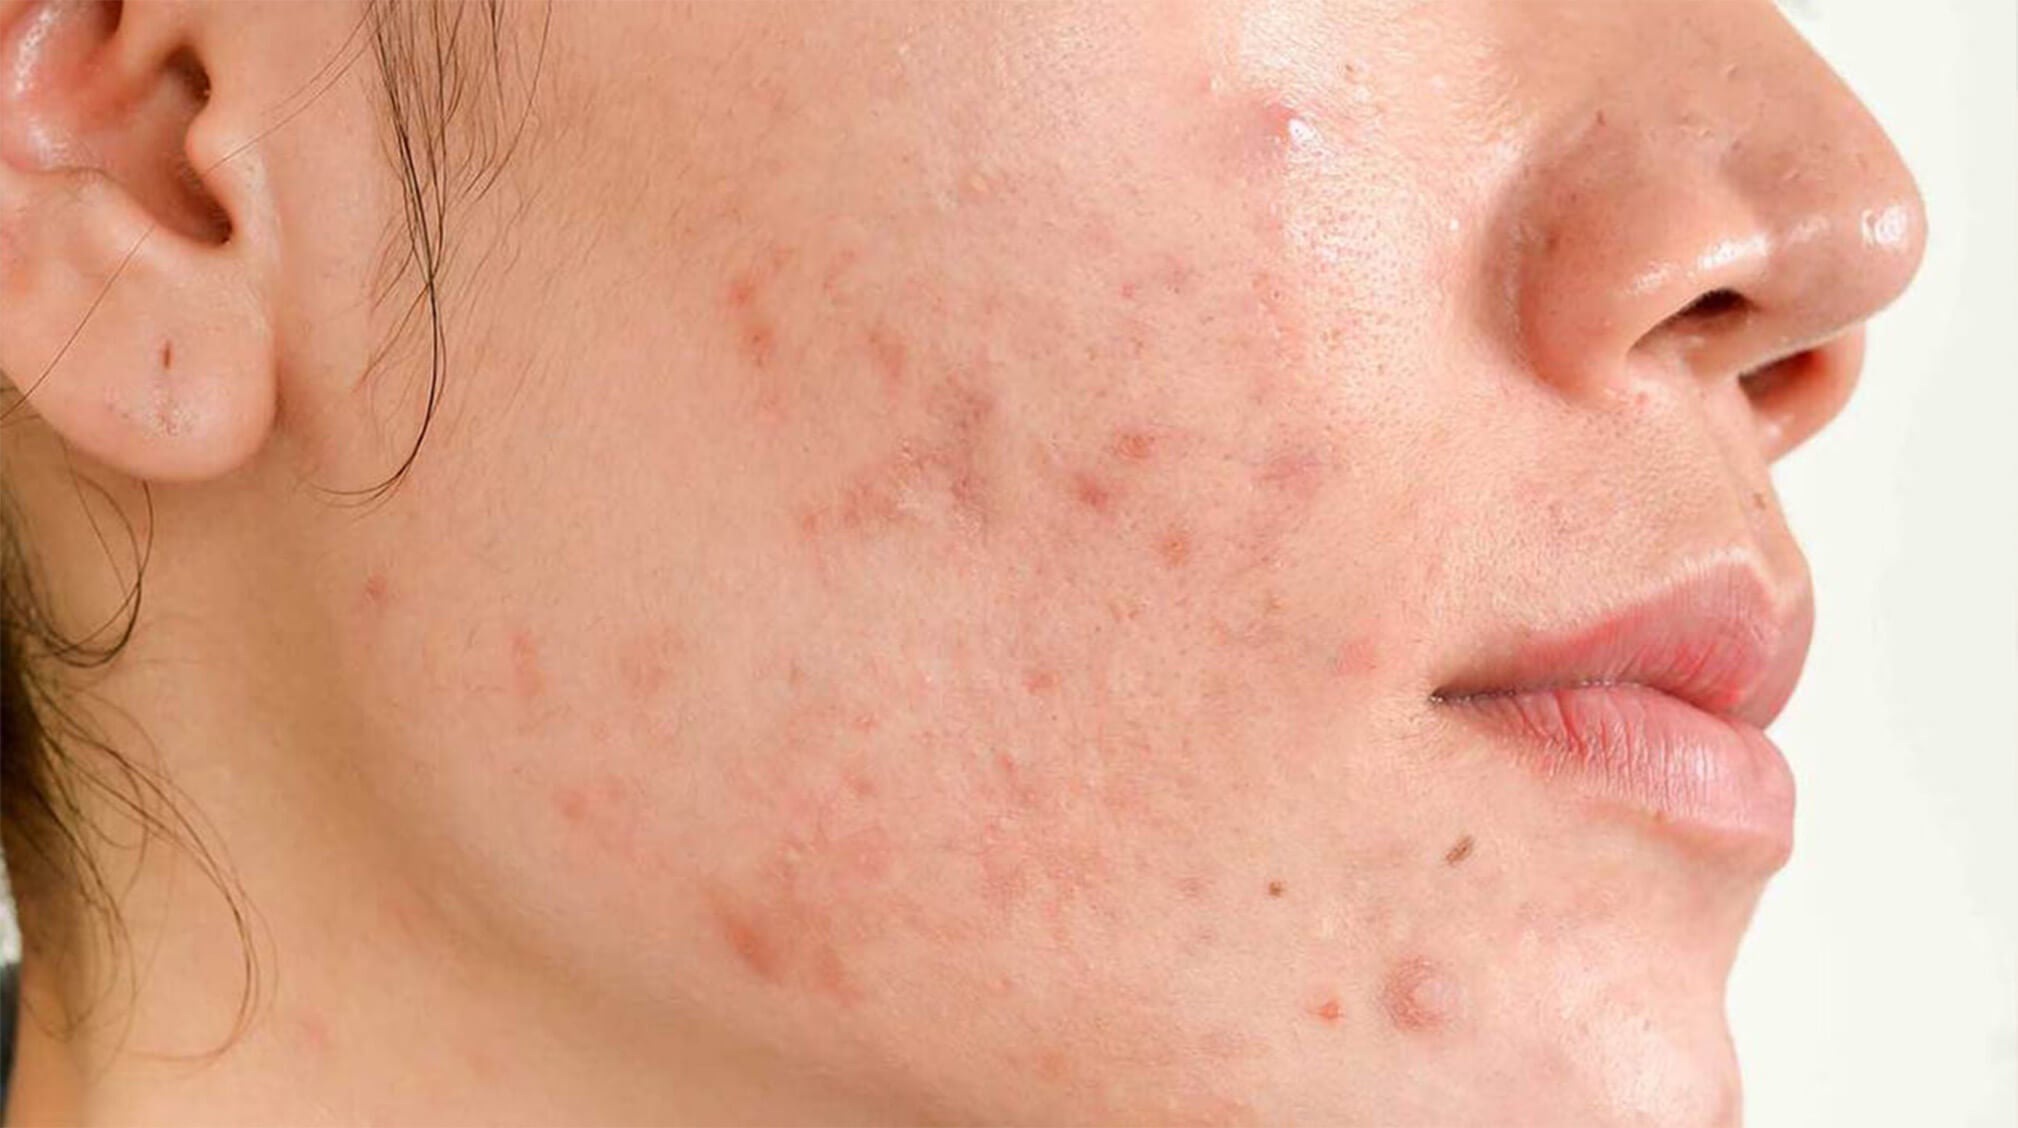 Caucasian woman with hormonal acne on face